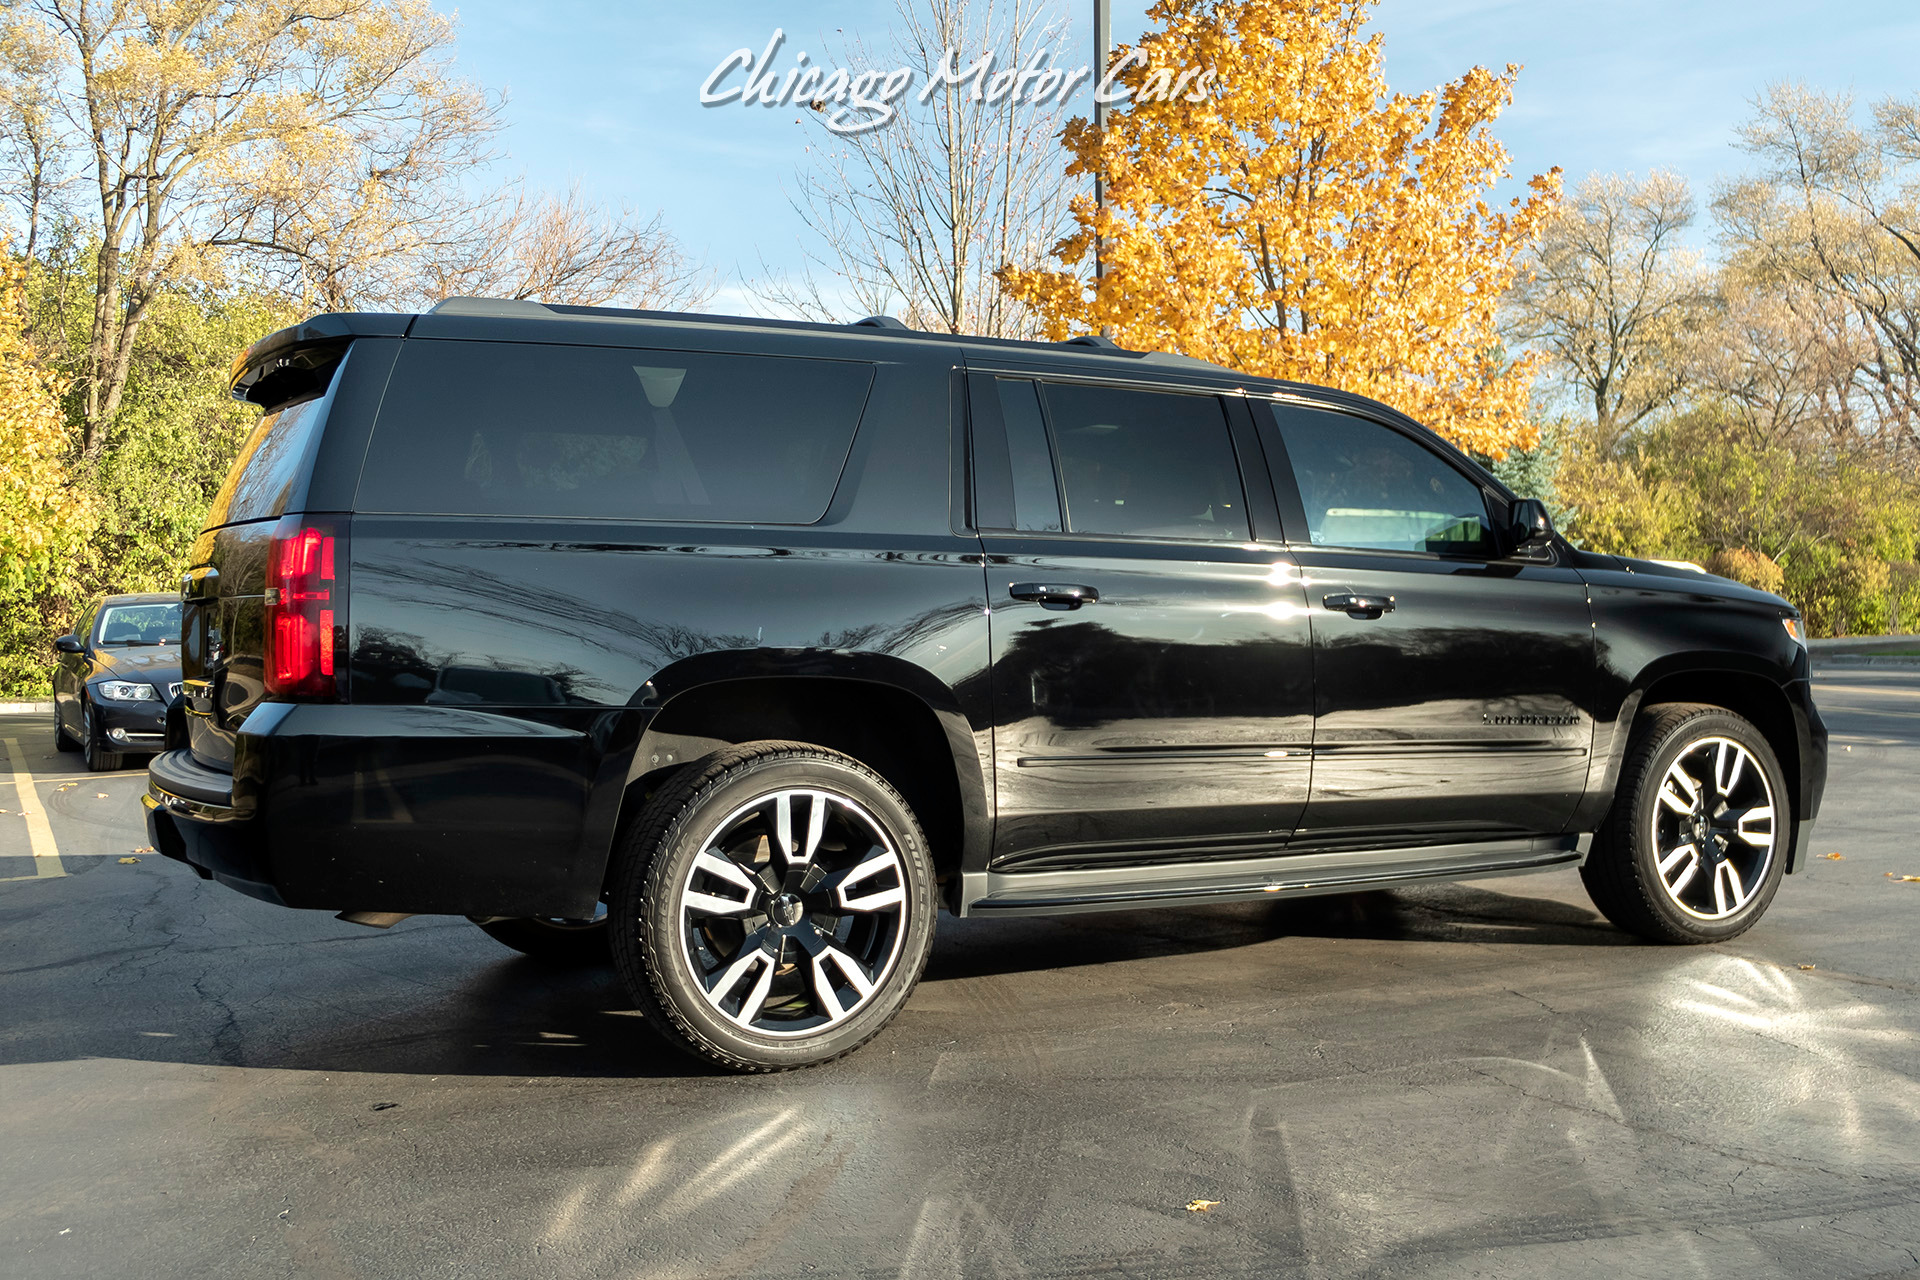 Used-2019-Chevrolet-Suburban-Premier-1500-4WD-RST-Edition-79k-MSRP